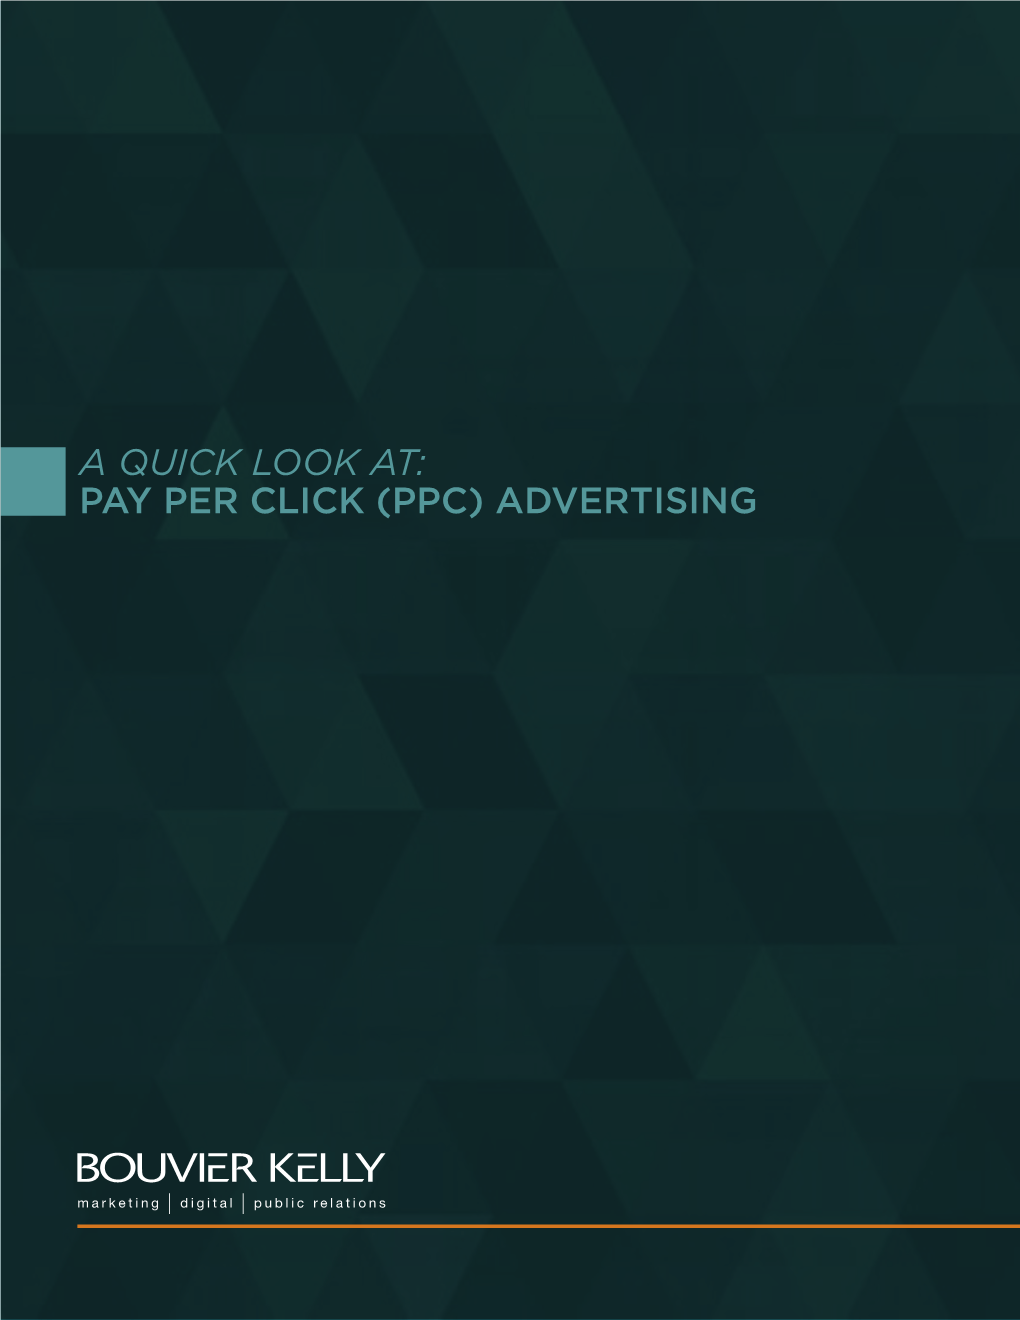 (Ppc) Advertising a Quick Look At: Pay-Per-Click (Ppc) Advertising